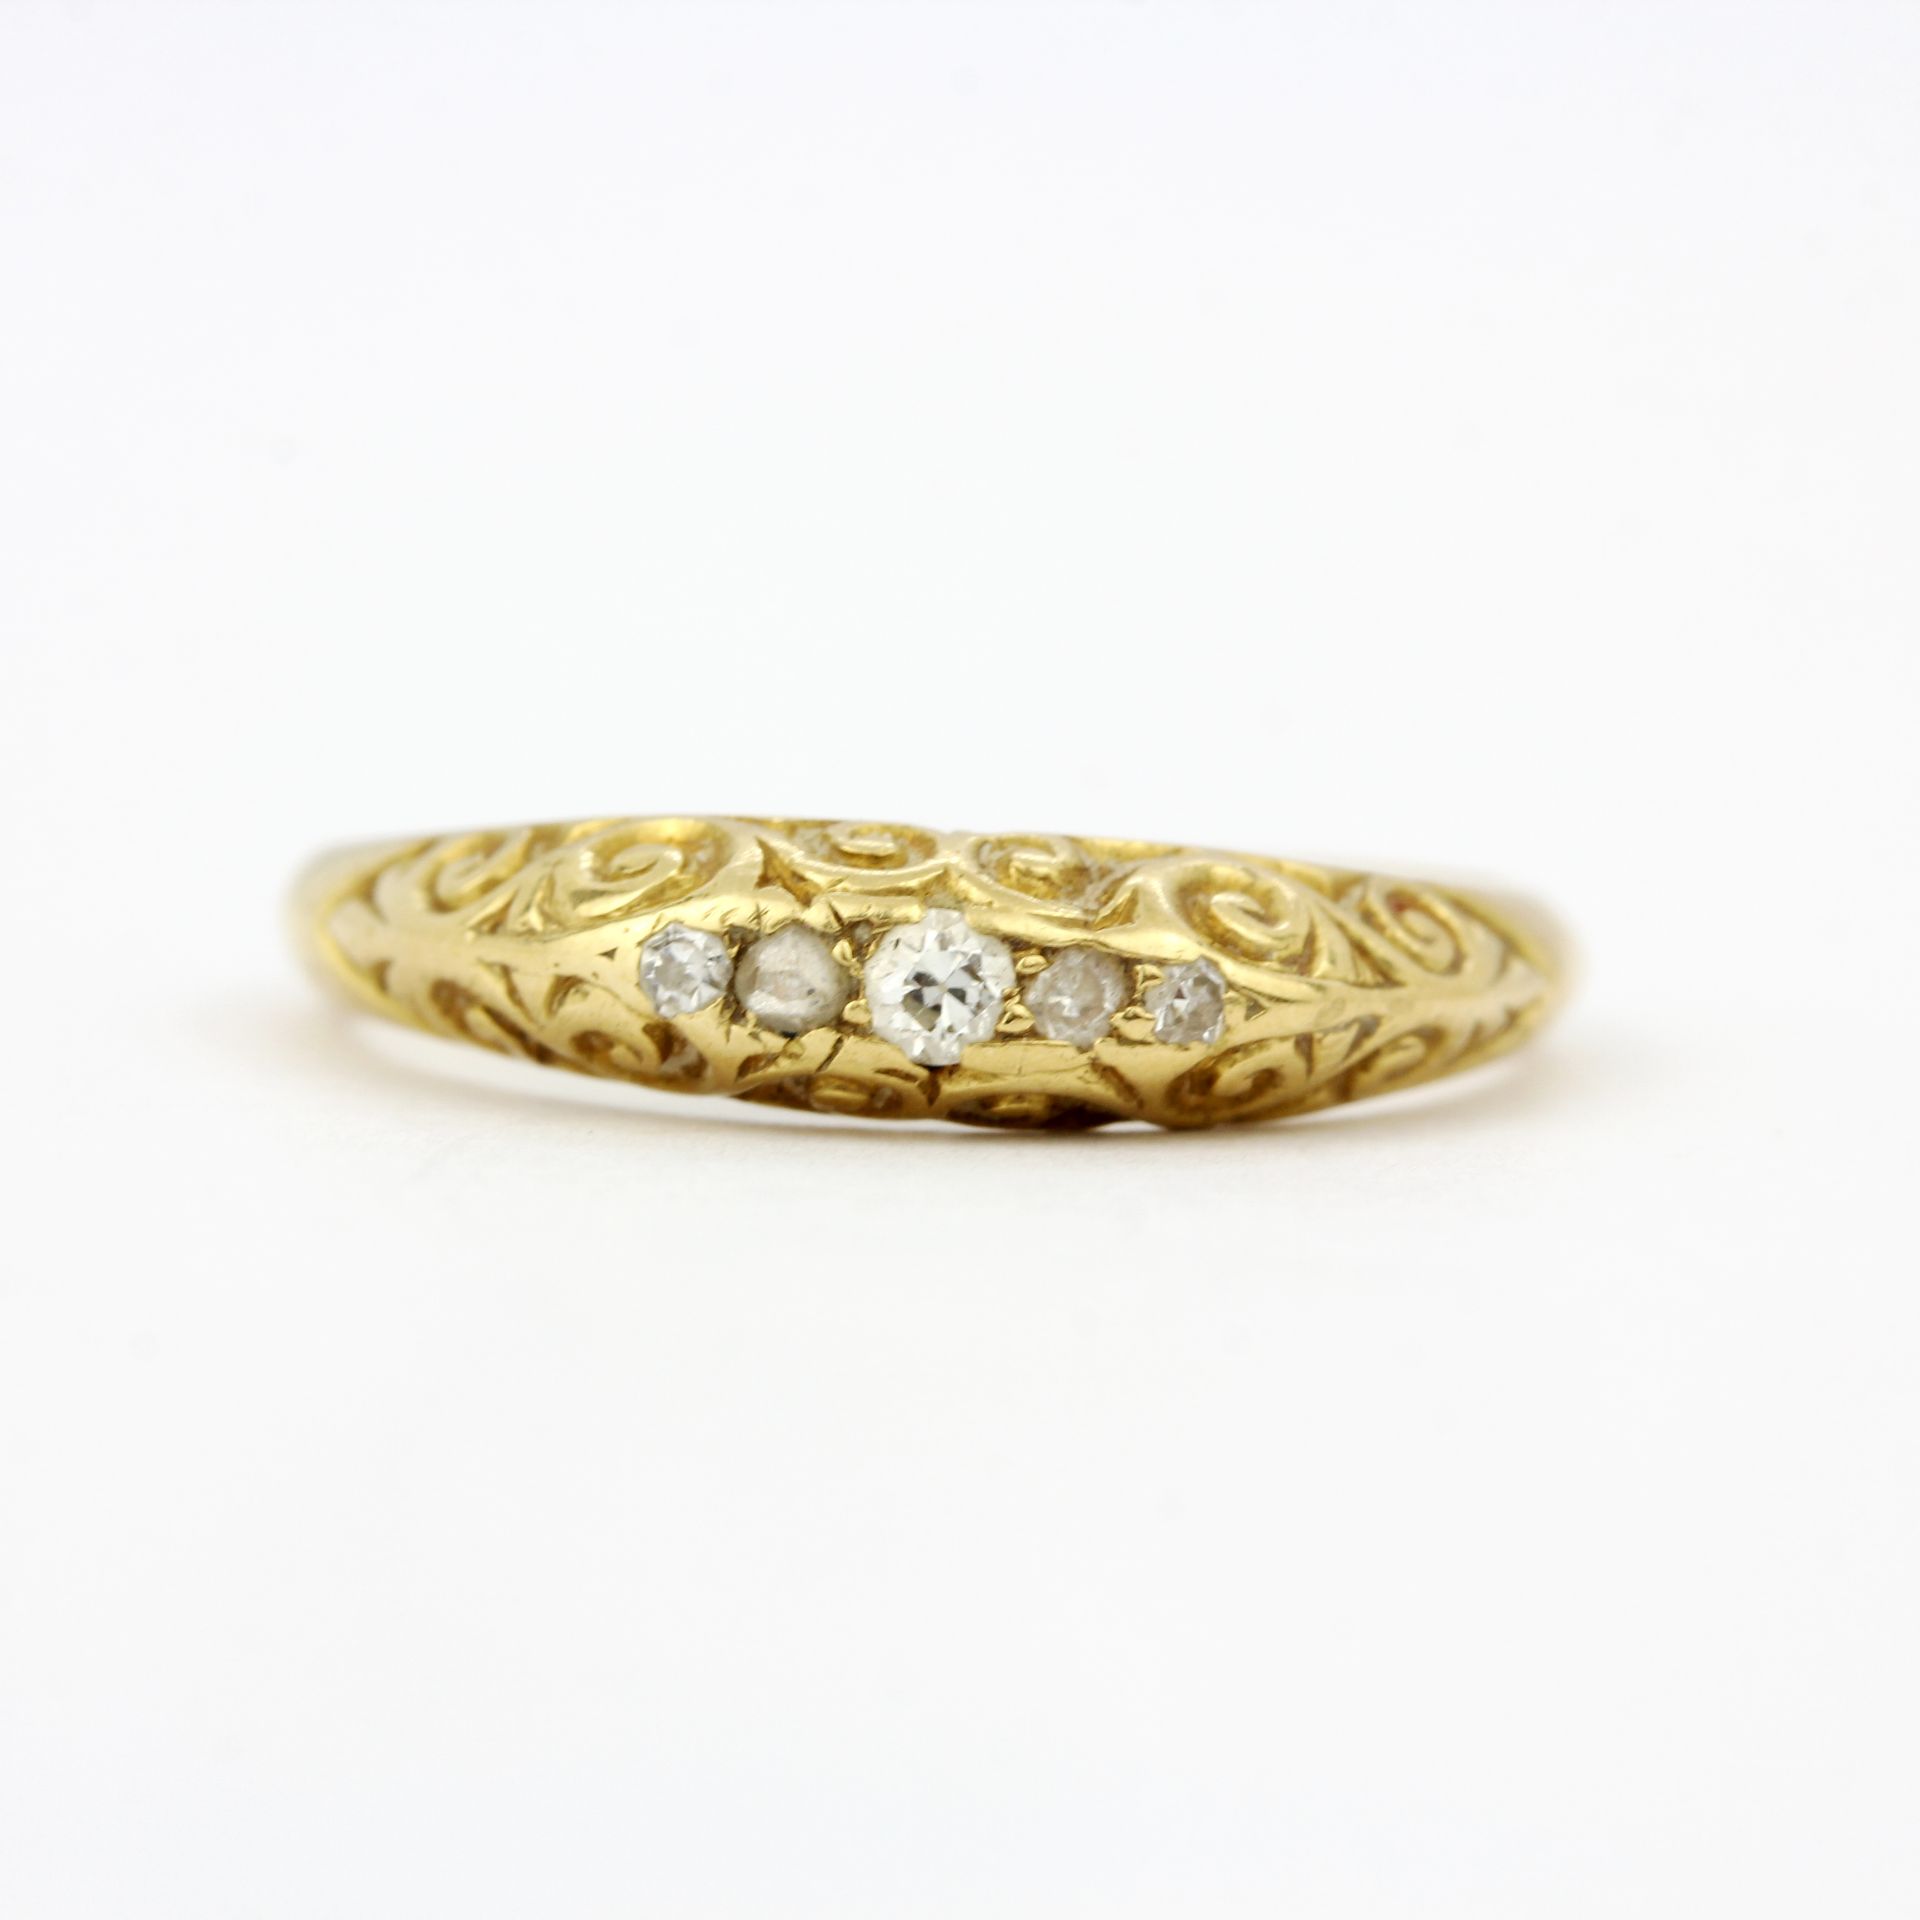 An antique 18ct yellow gold ring set with rose cut diamonds, ring size P.